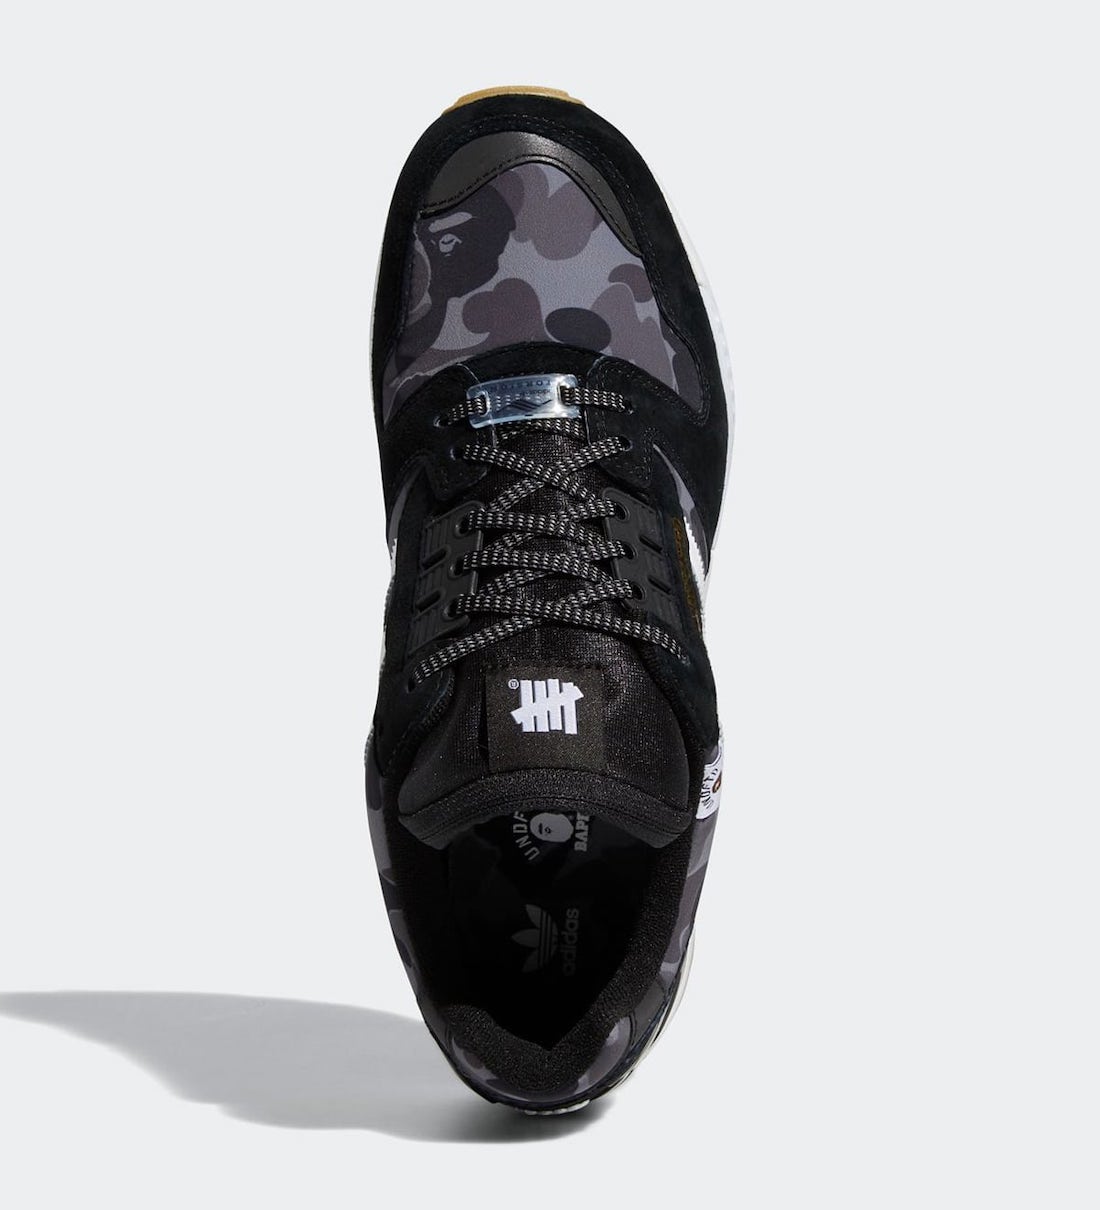 BAPE Undefeated adidas ZX 8000 FY8852 Release Date